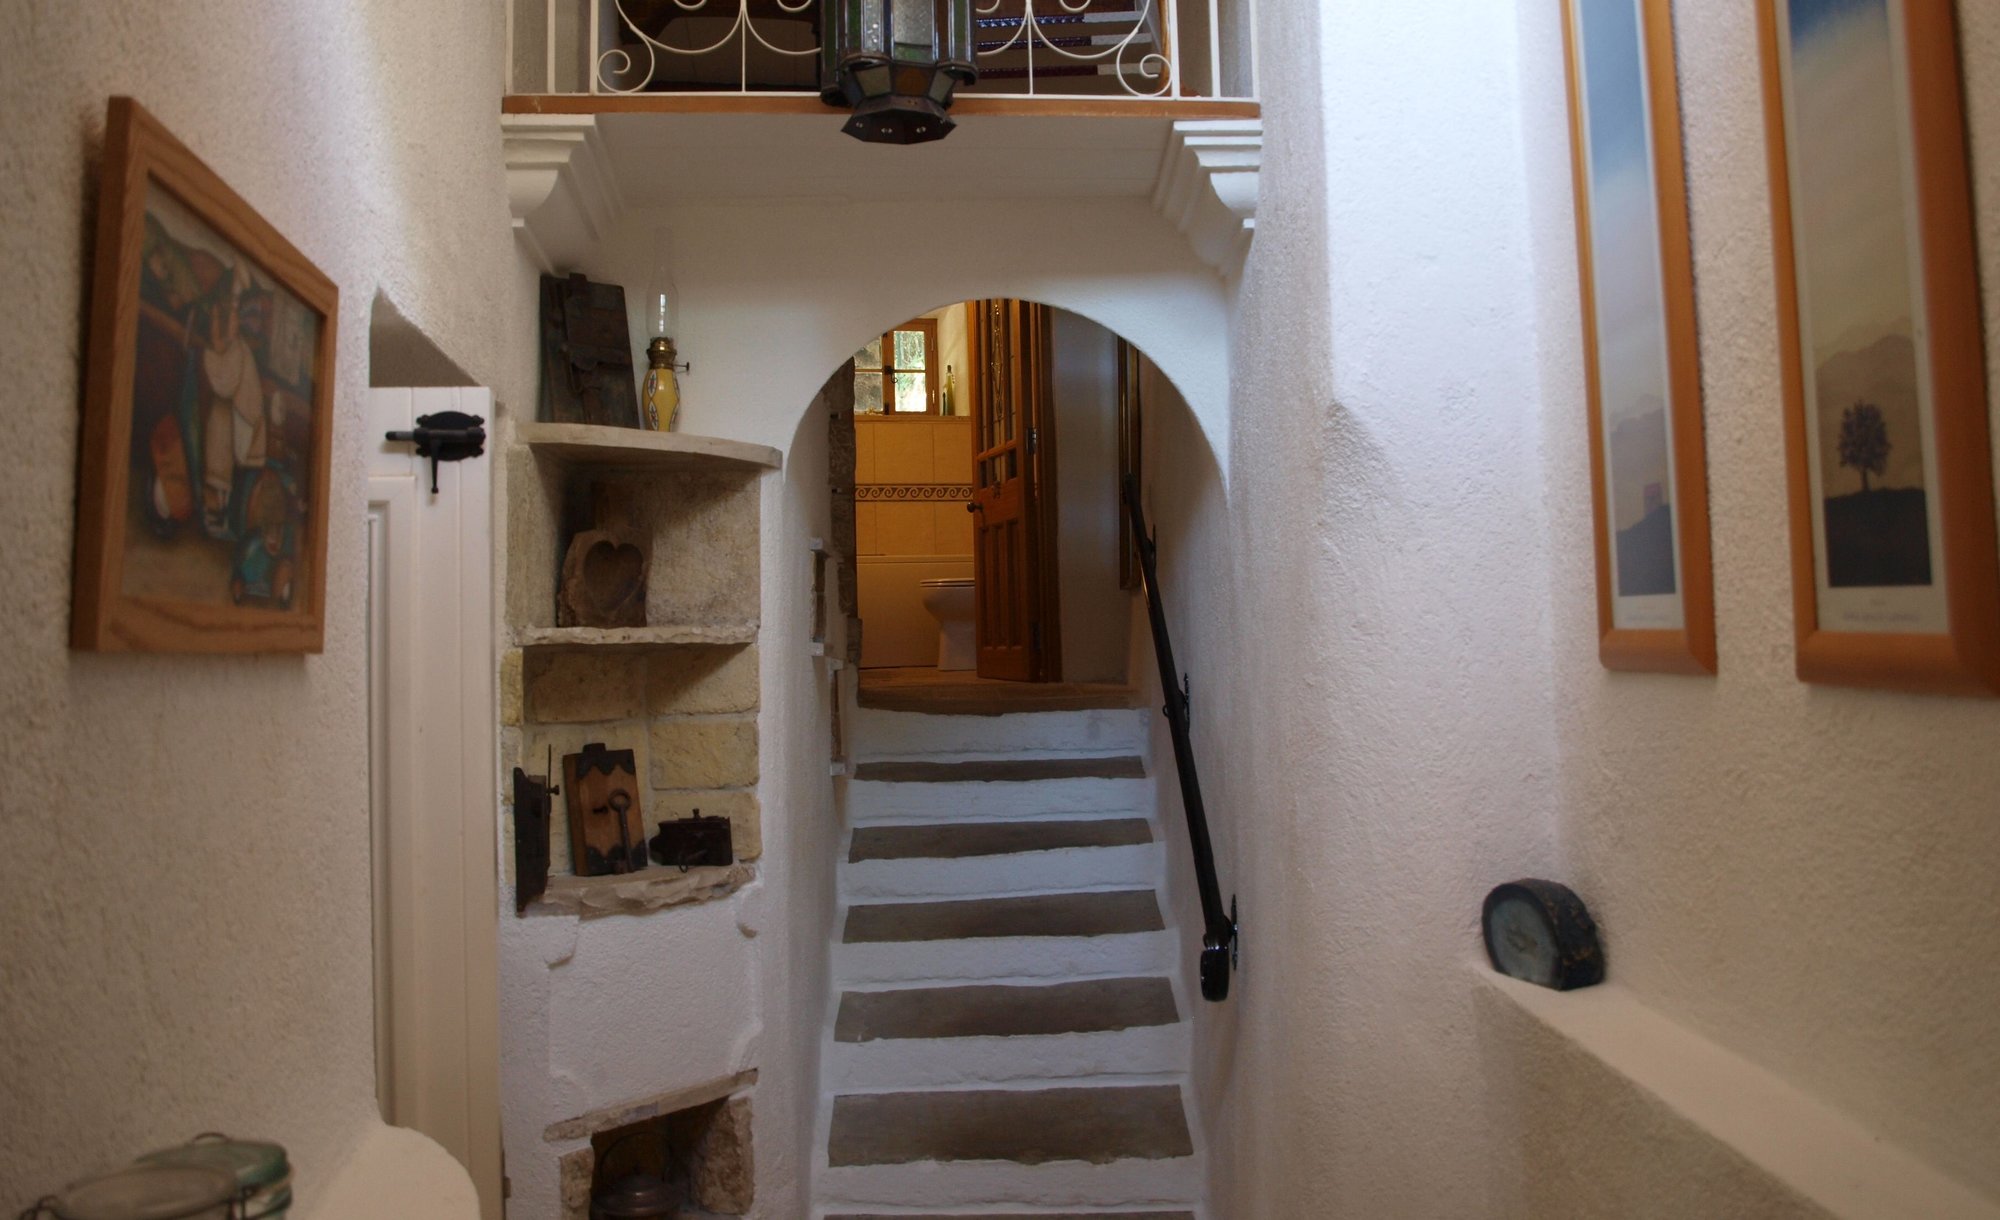 Stairs to First Floor